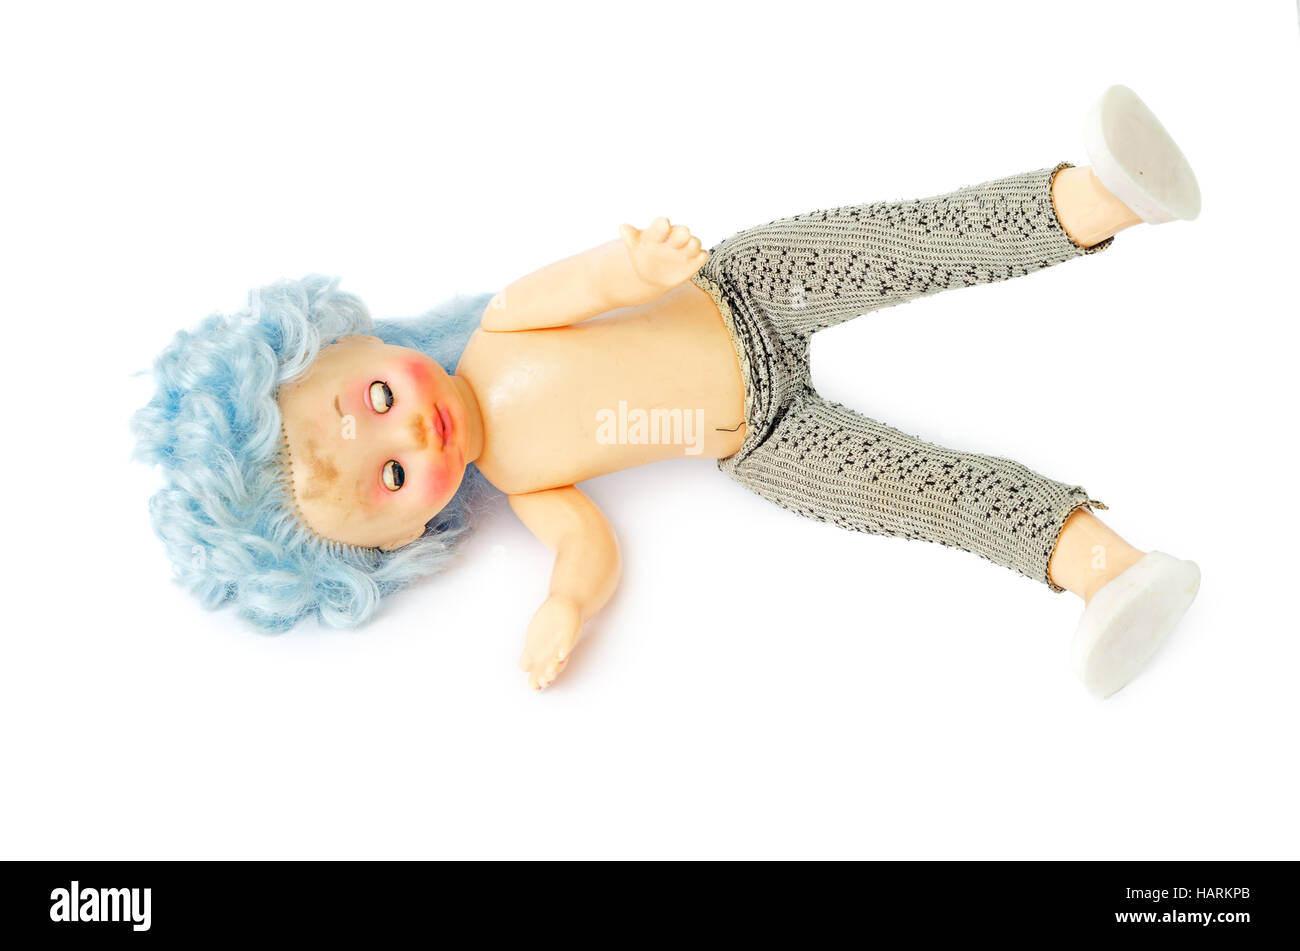 The thrown-out old dirty plastic doll with blue hair isolated on white background. Lies on one side with сlosed eyes. Stock Photo